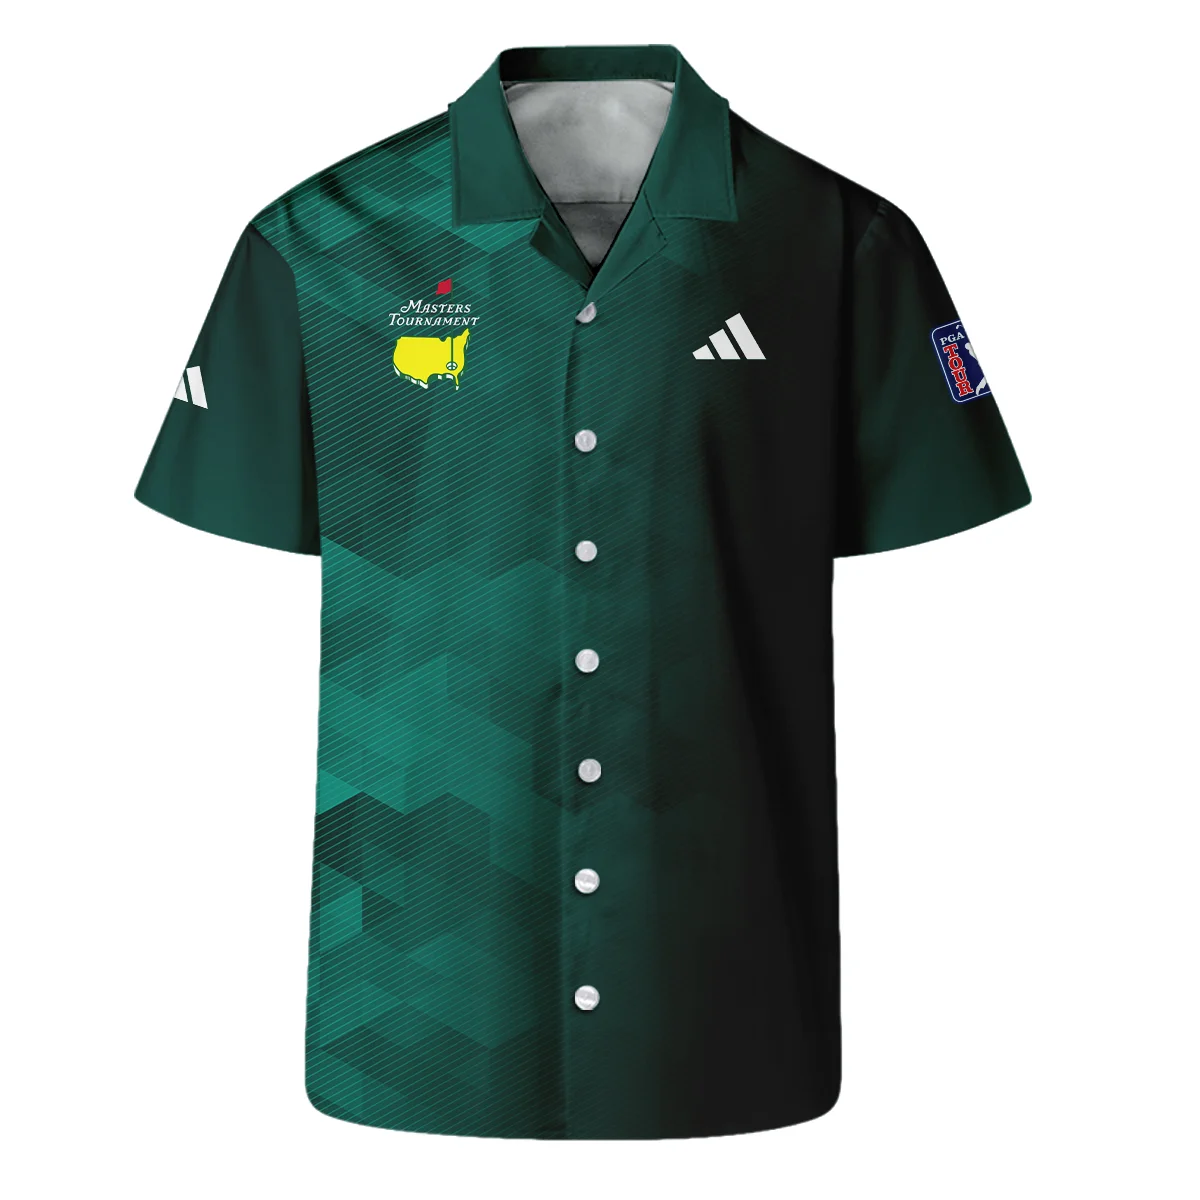 Adidas Golf Sport Dark Green Gradient Abstract Background Masters Tournament Vneck Long Polo Shirt Style Classic Long Polo Shirt For Men